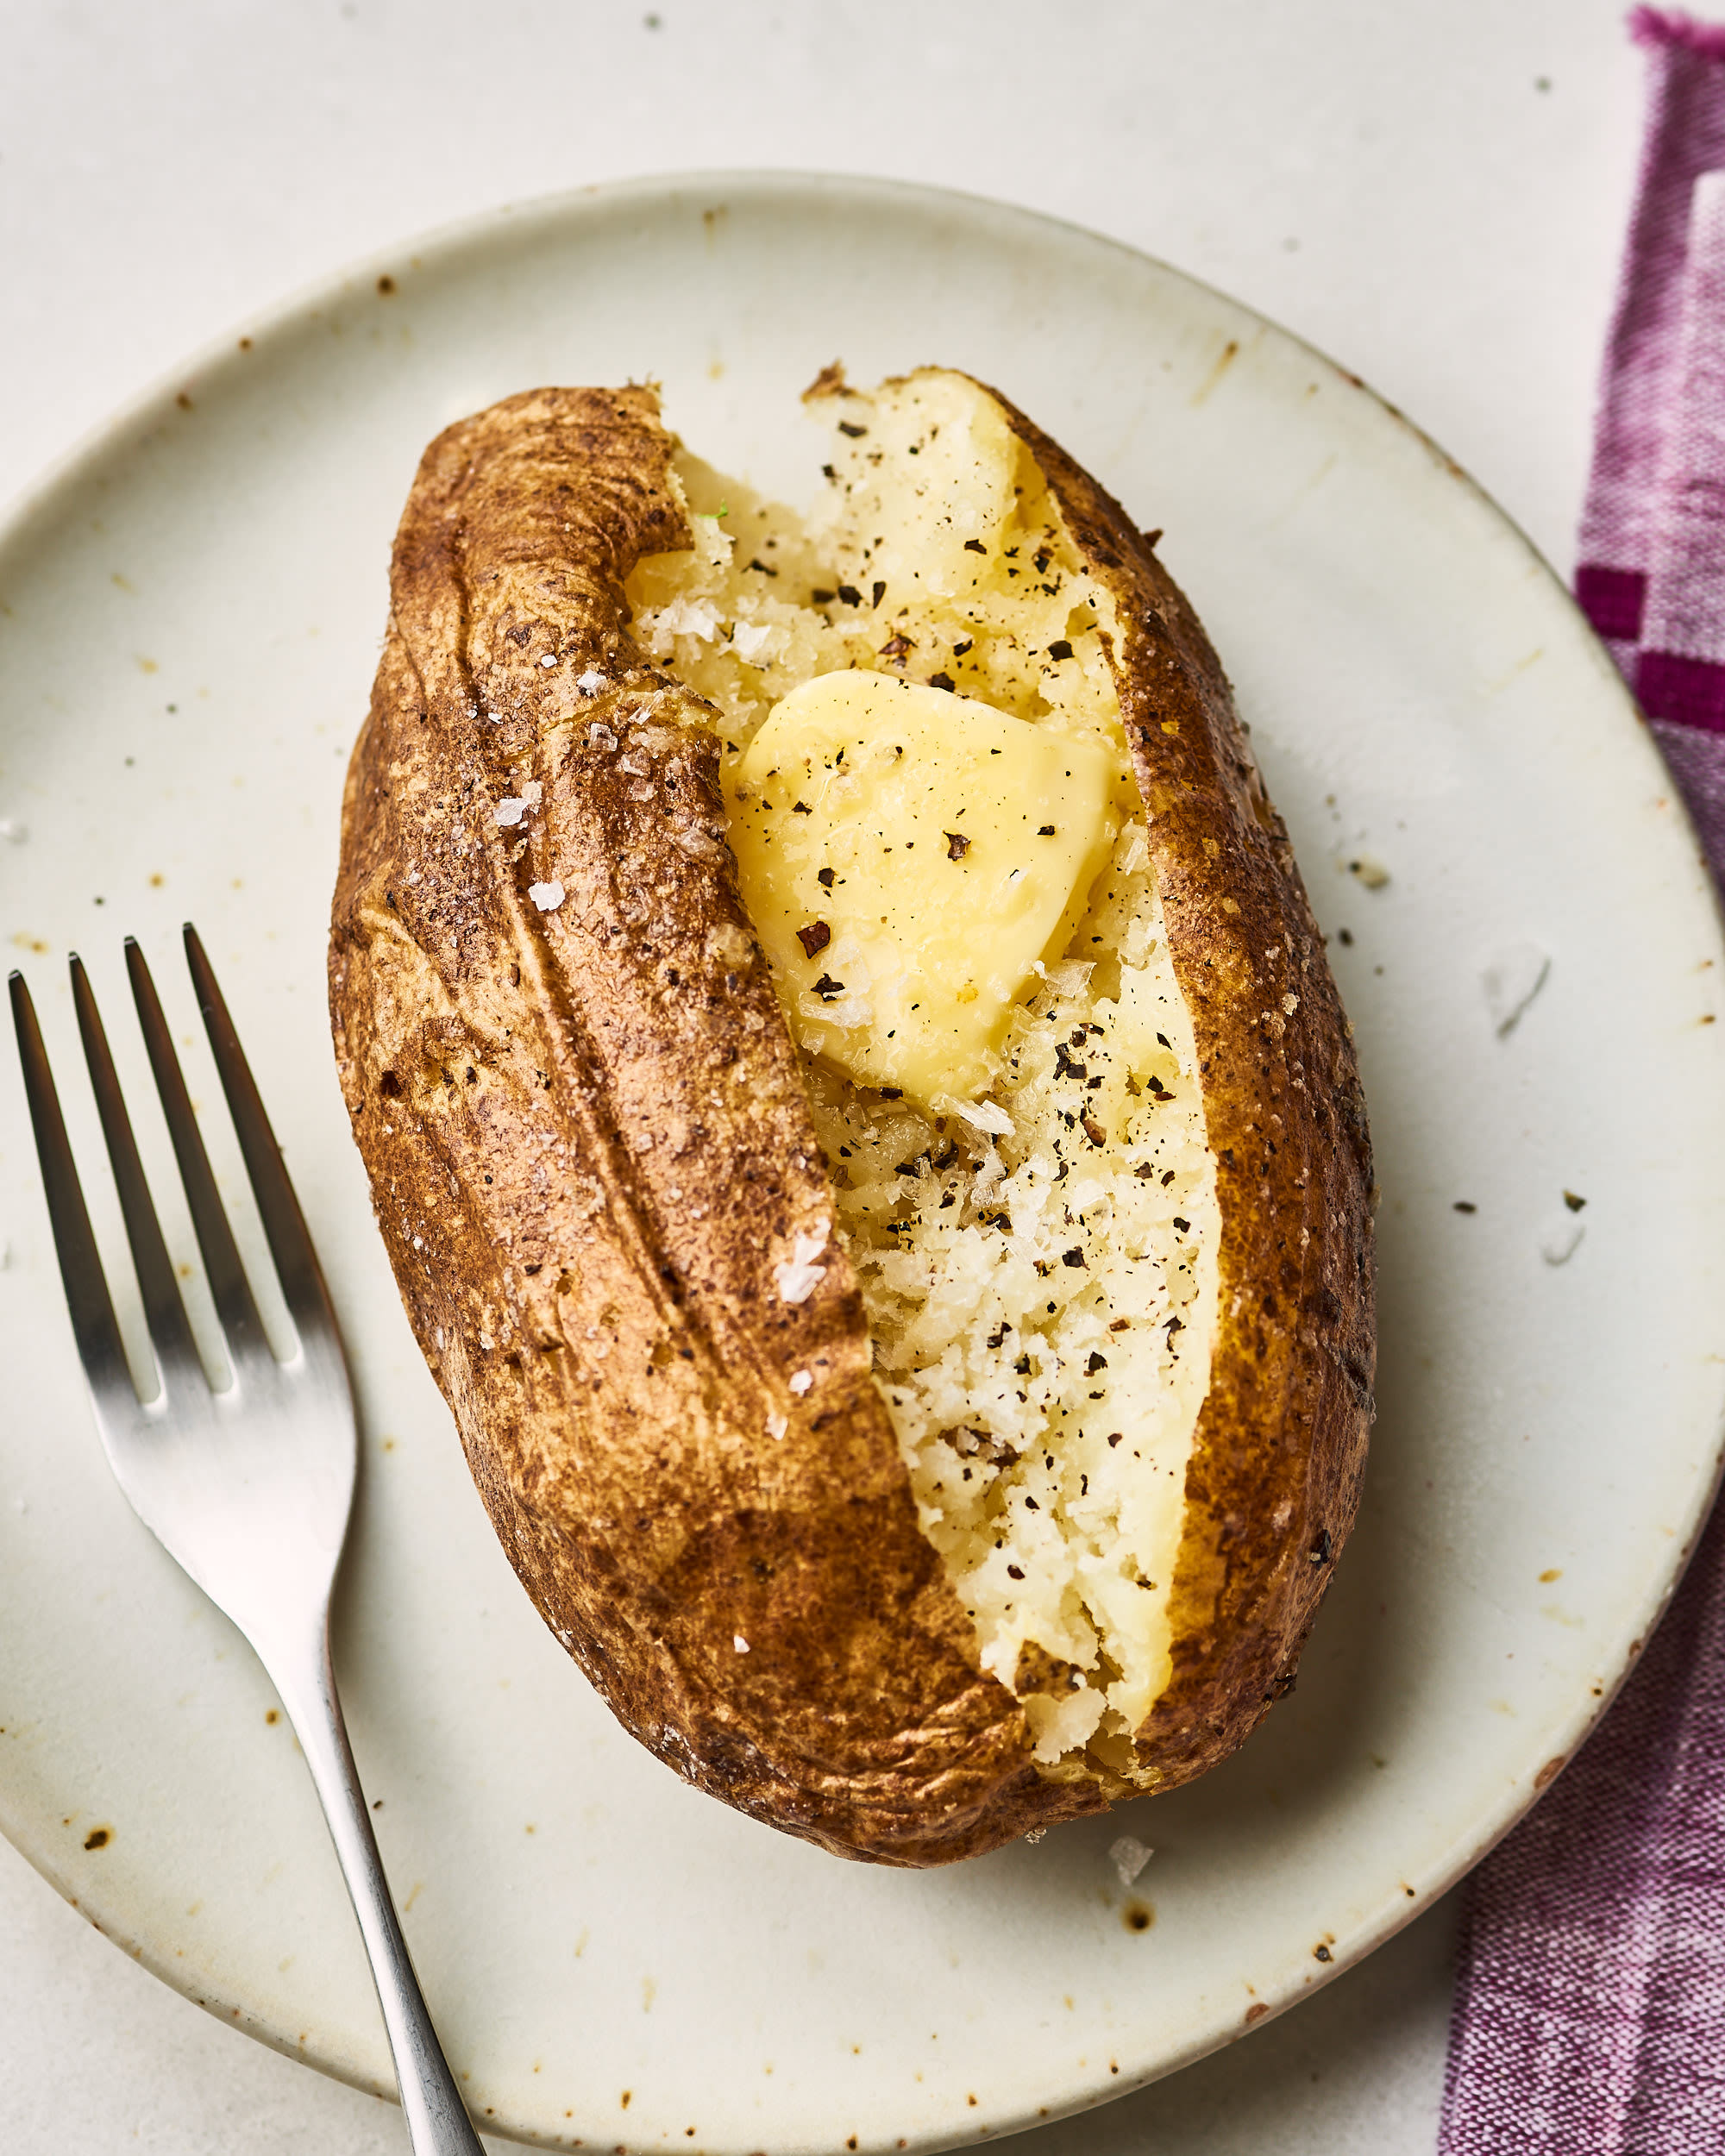 Baked Potatoes: Oven, Air Fryer, Microwave - A Beautiful Mess